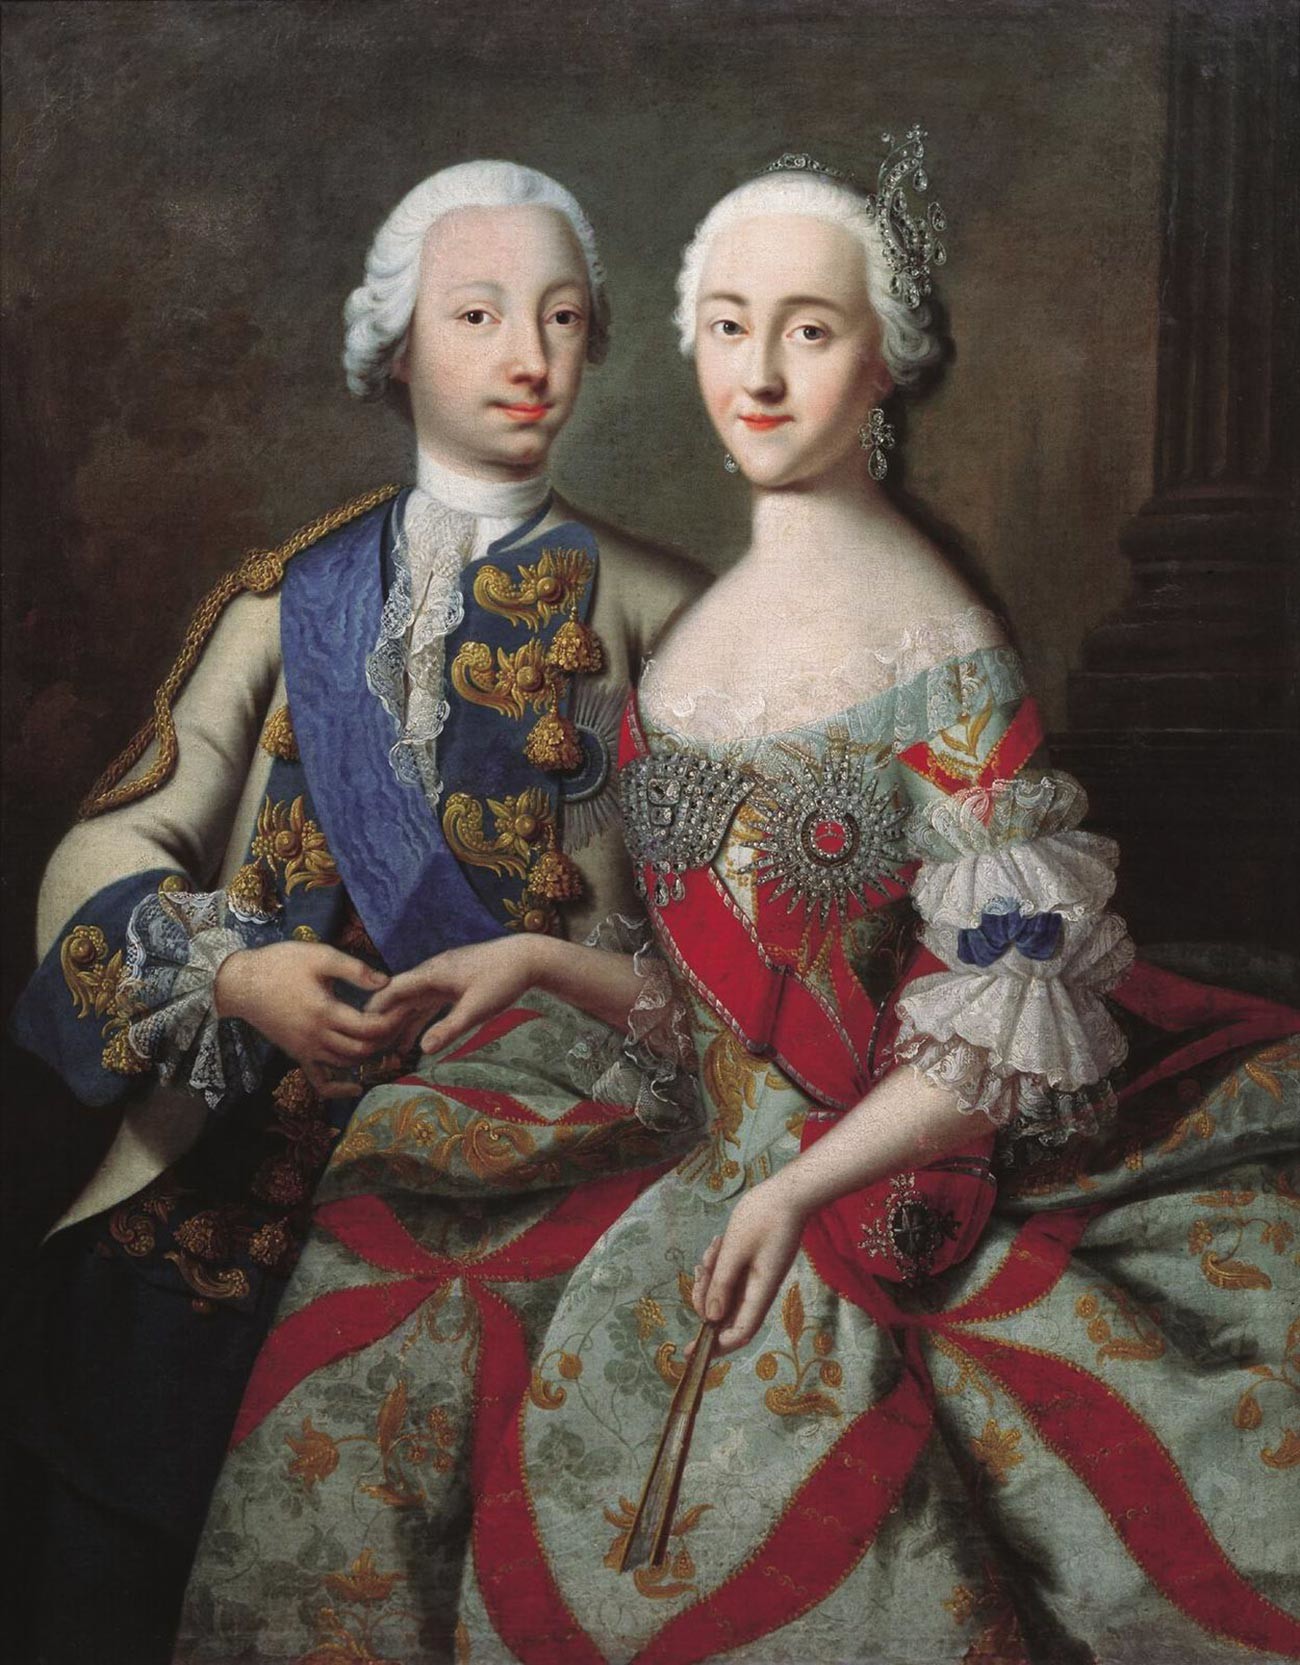 Peter and Catherine as Grand Dukes, before Peter became the Russian Emperor